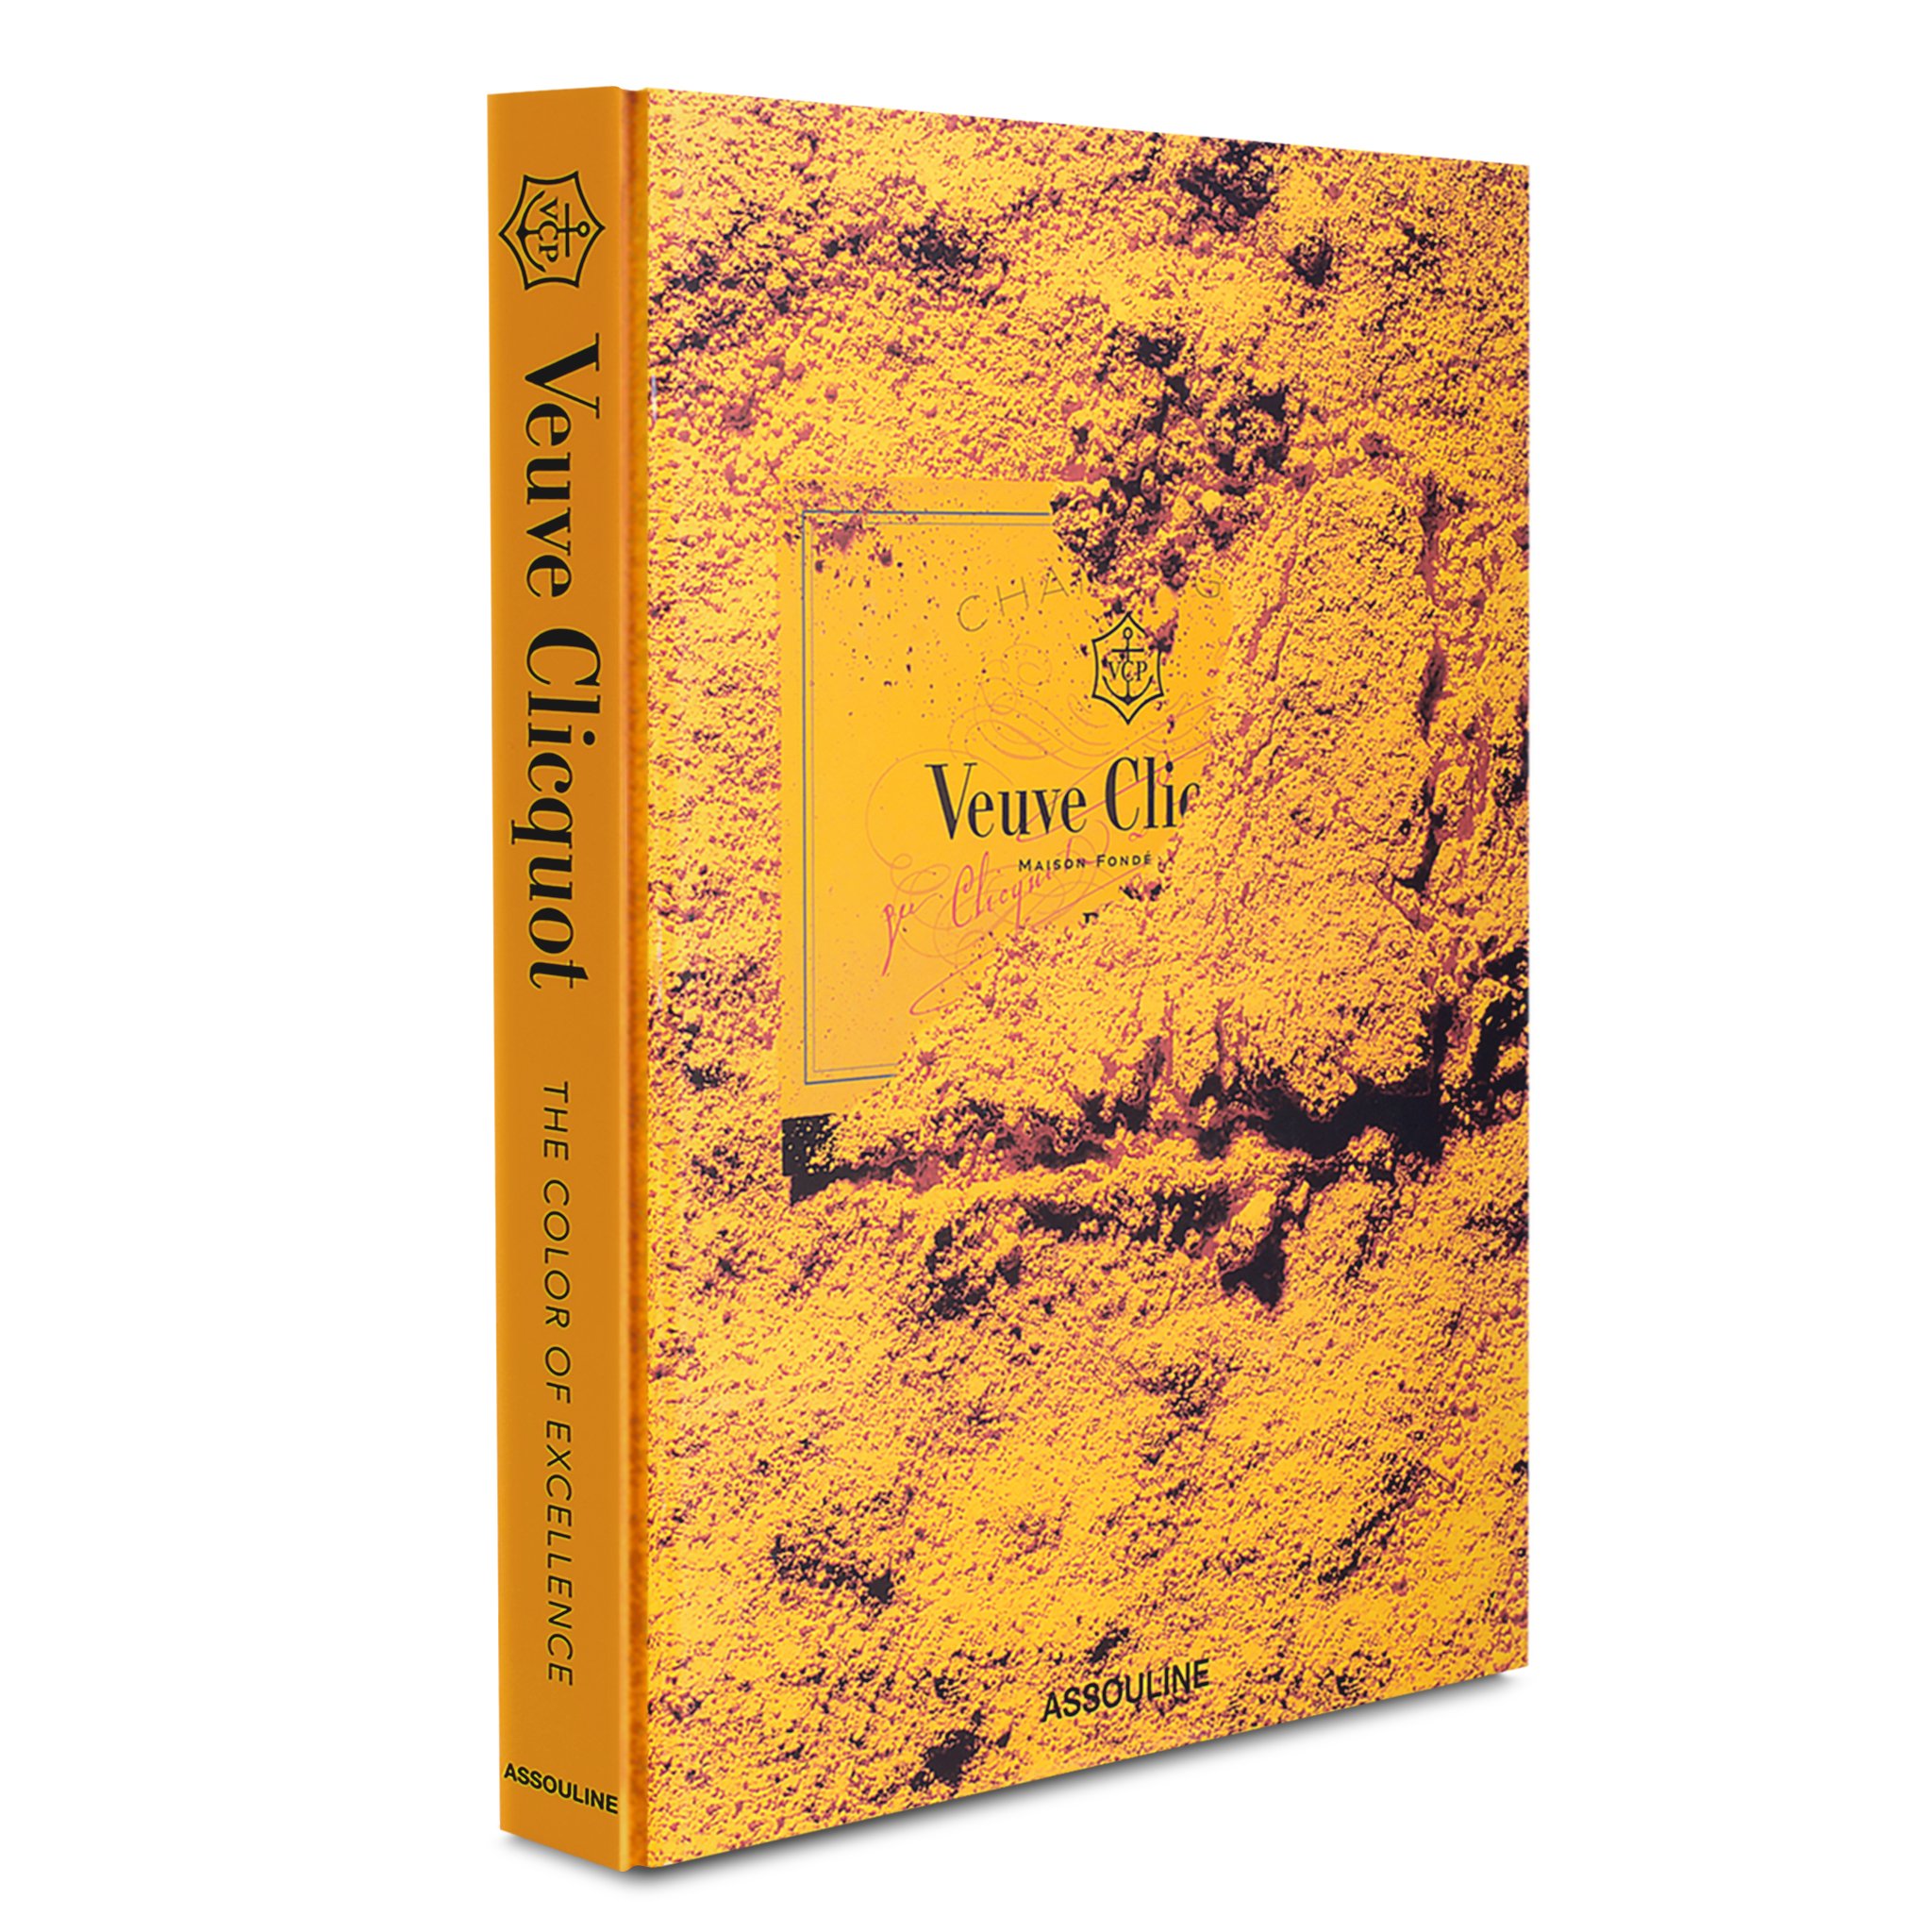 Veuve Clicquot - The Color of Excellence